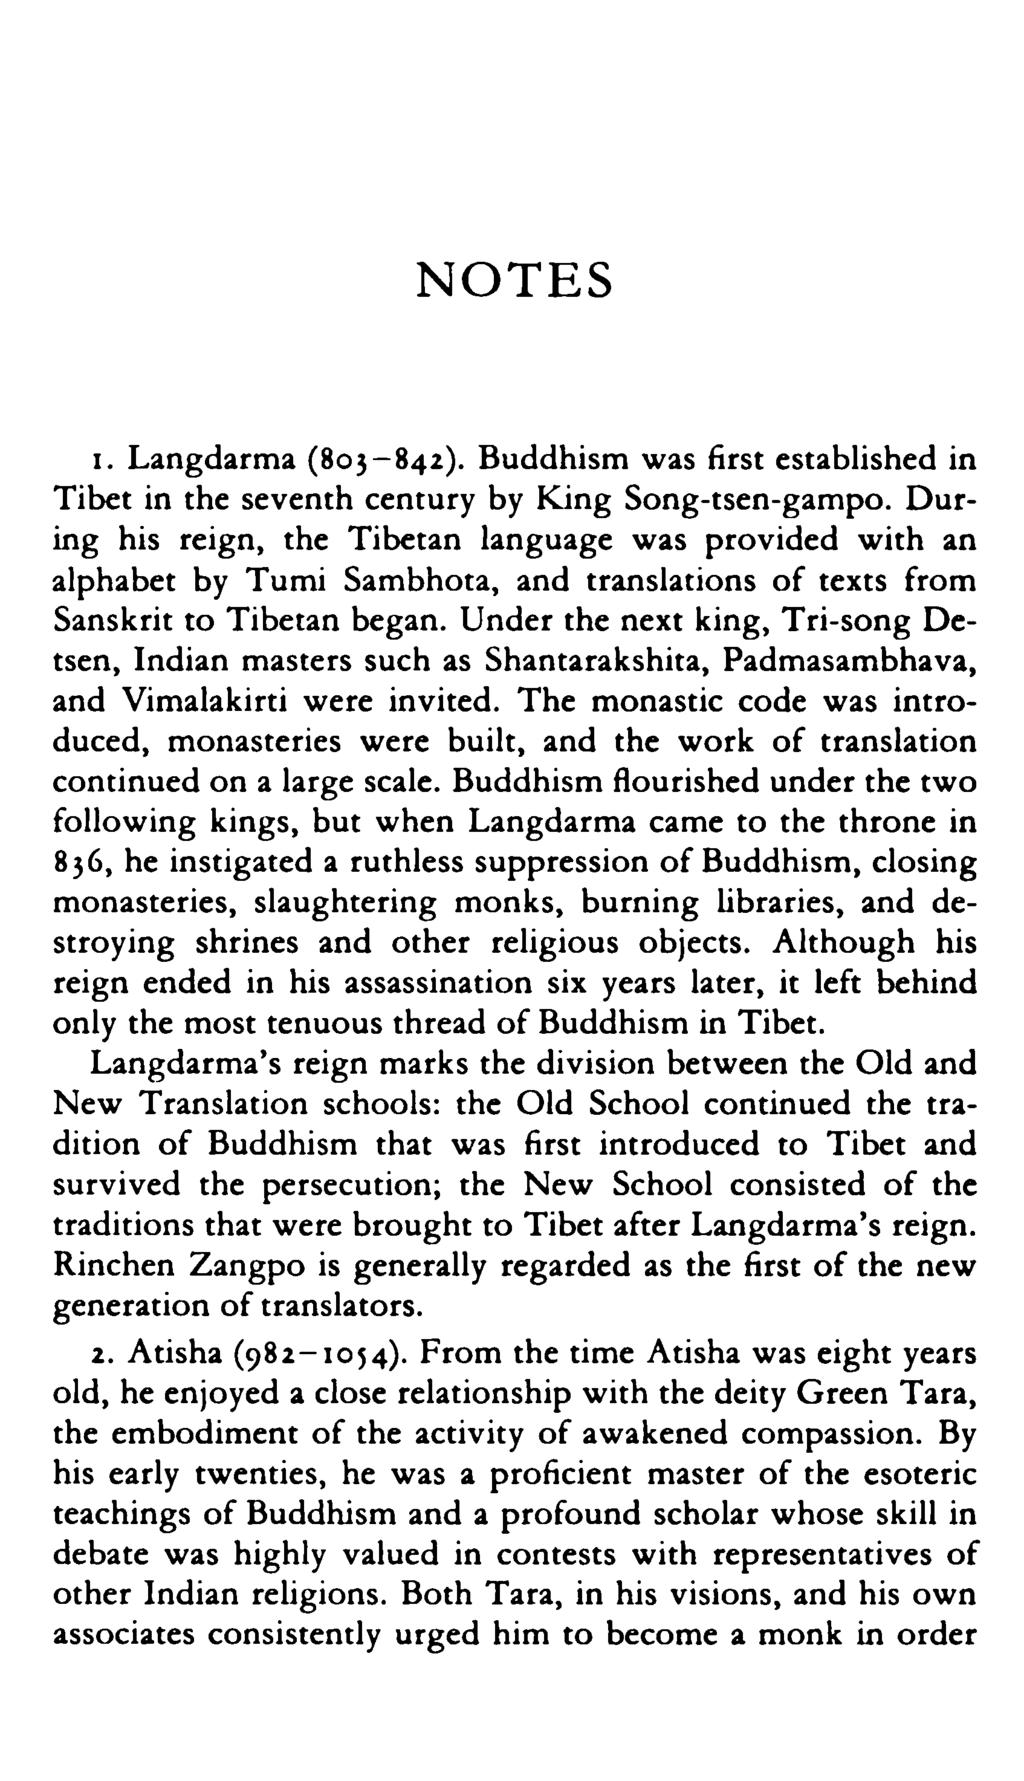 NOTES 1. Langdarma (803-842). Buddhism was first established in Tibet in the seventh century by King Song-tsen-gampo.